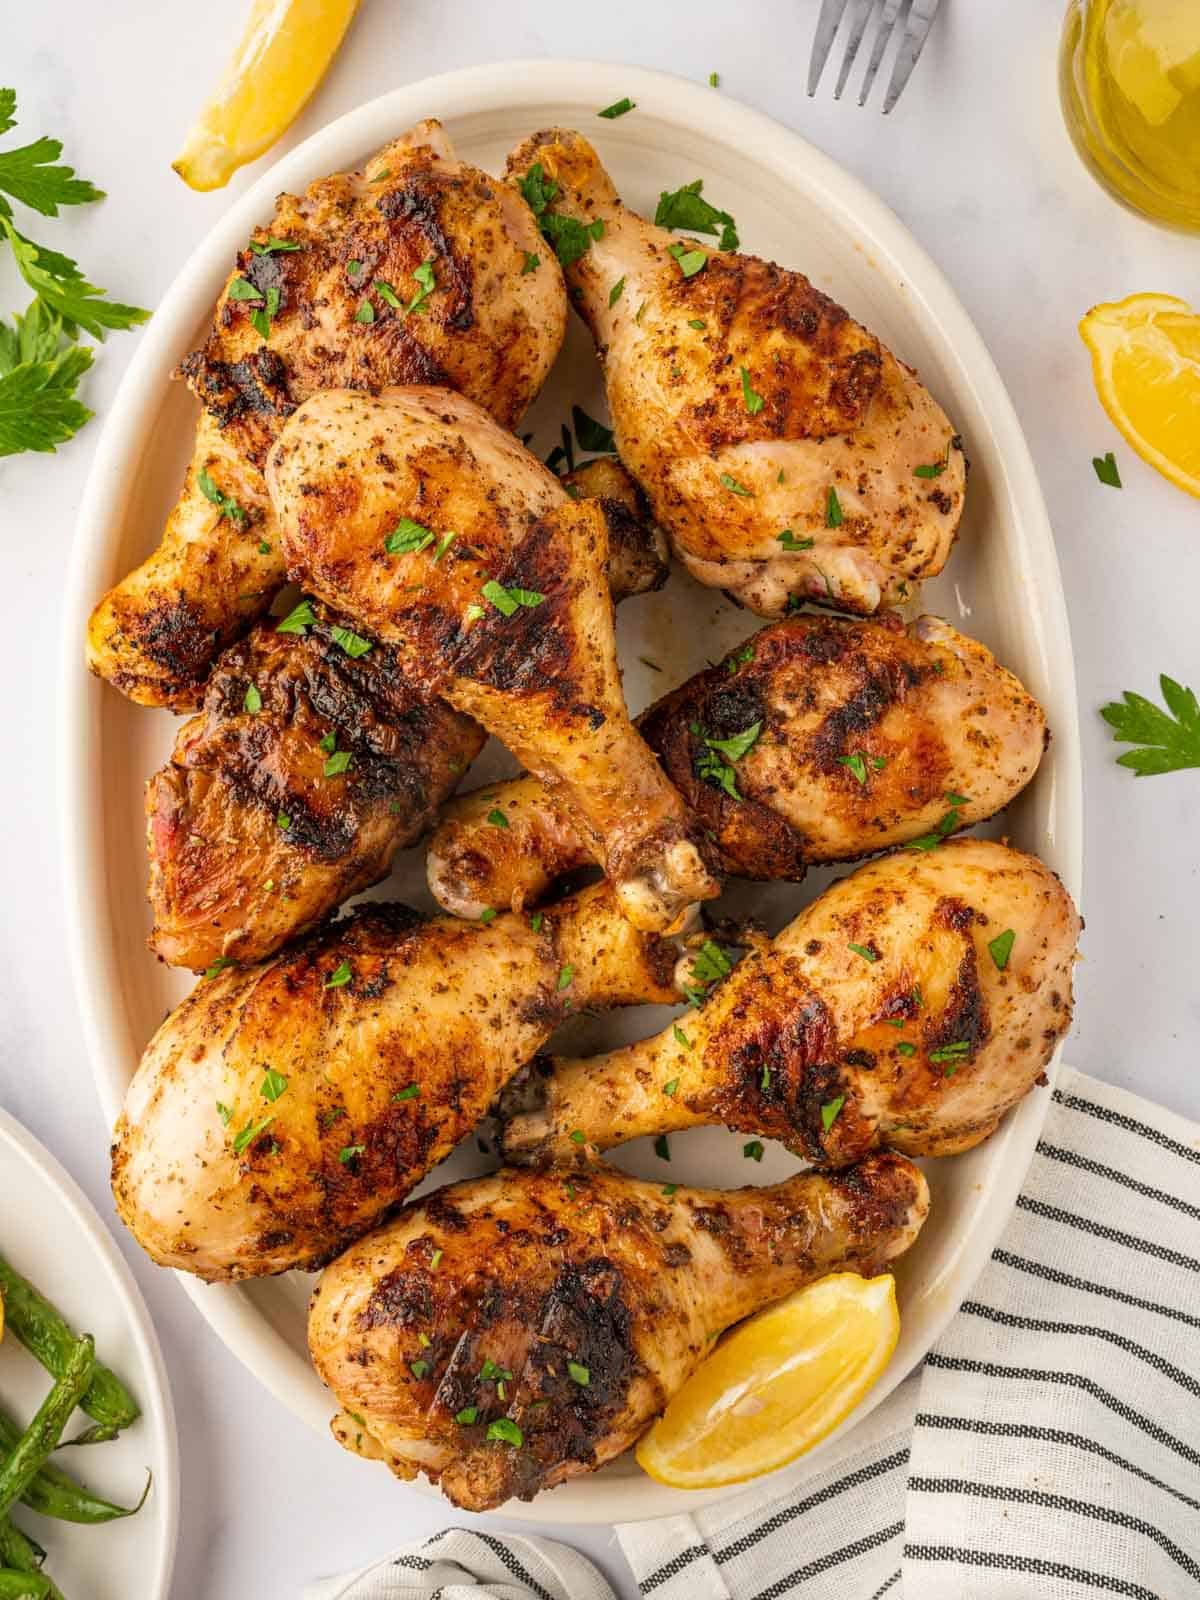 A platter with grilled chicken legs garnished with lemon wedges.